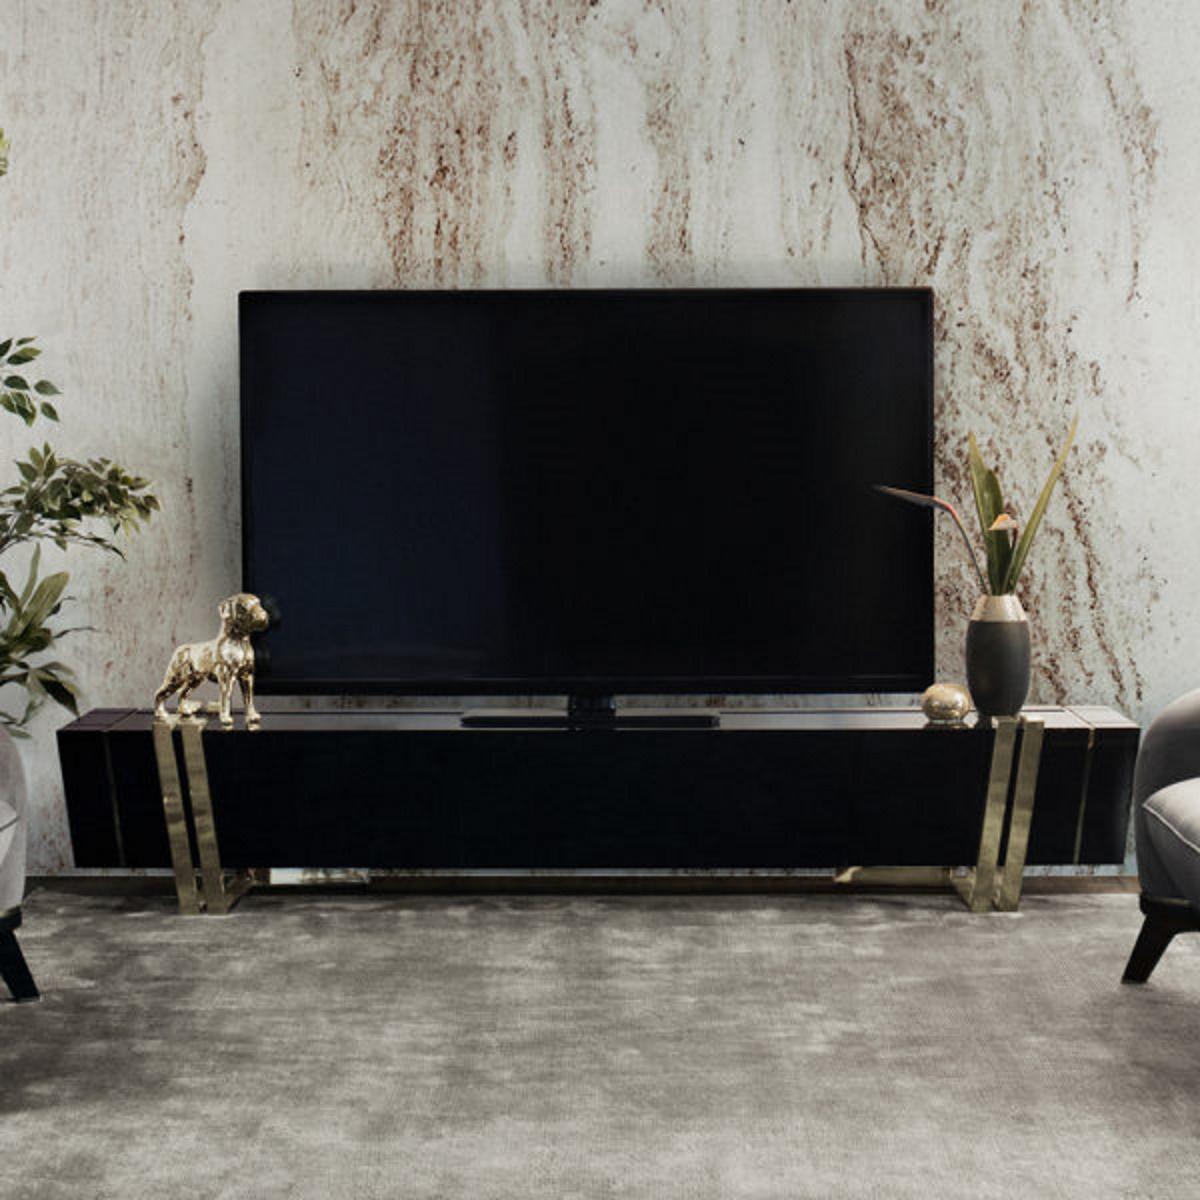 TV Cabinet is a defining presence and will change any room it is part of, creating a glorious atmosphere around it. A daring, yet elegant balance between the finest materials, Nero Marquina marble, gold plated brass, and black lacquered wood. An